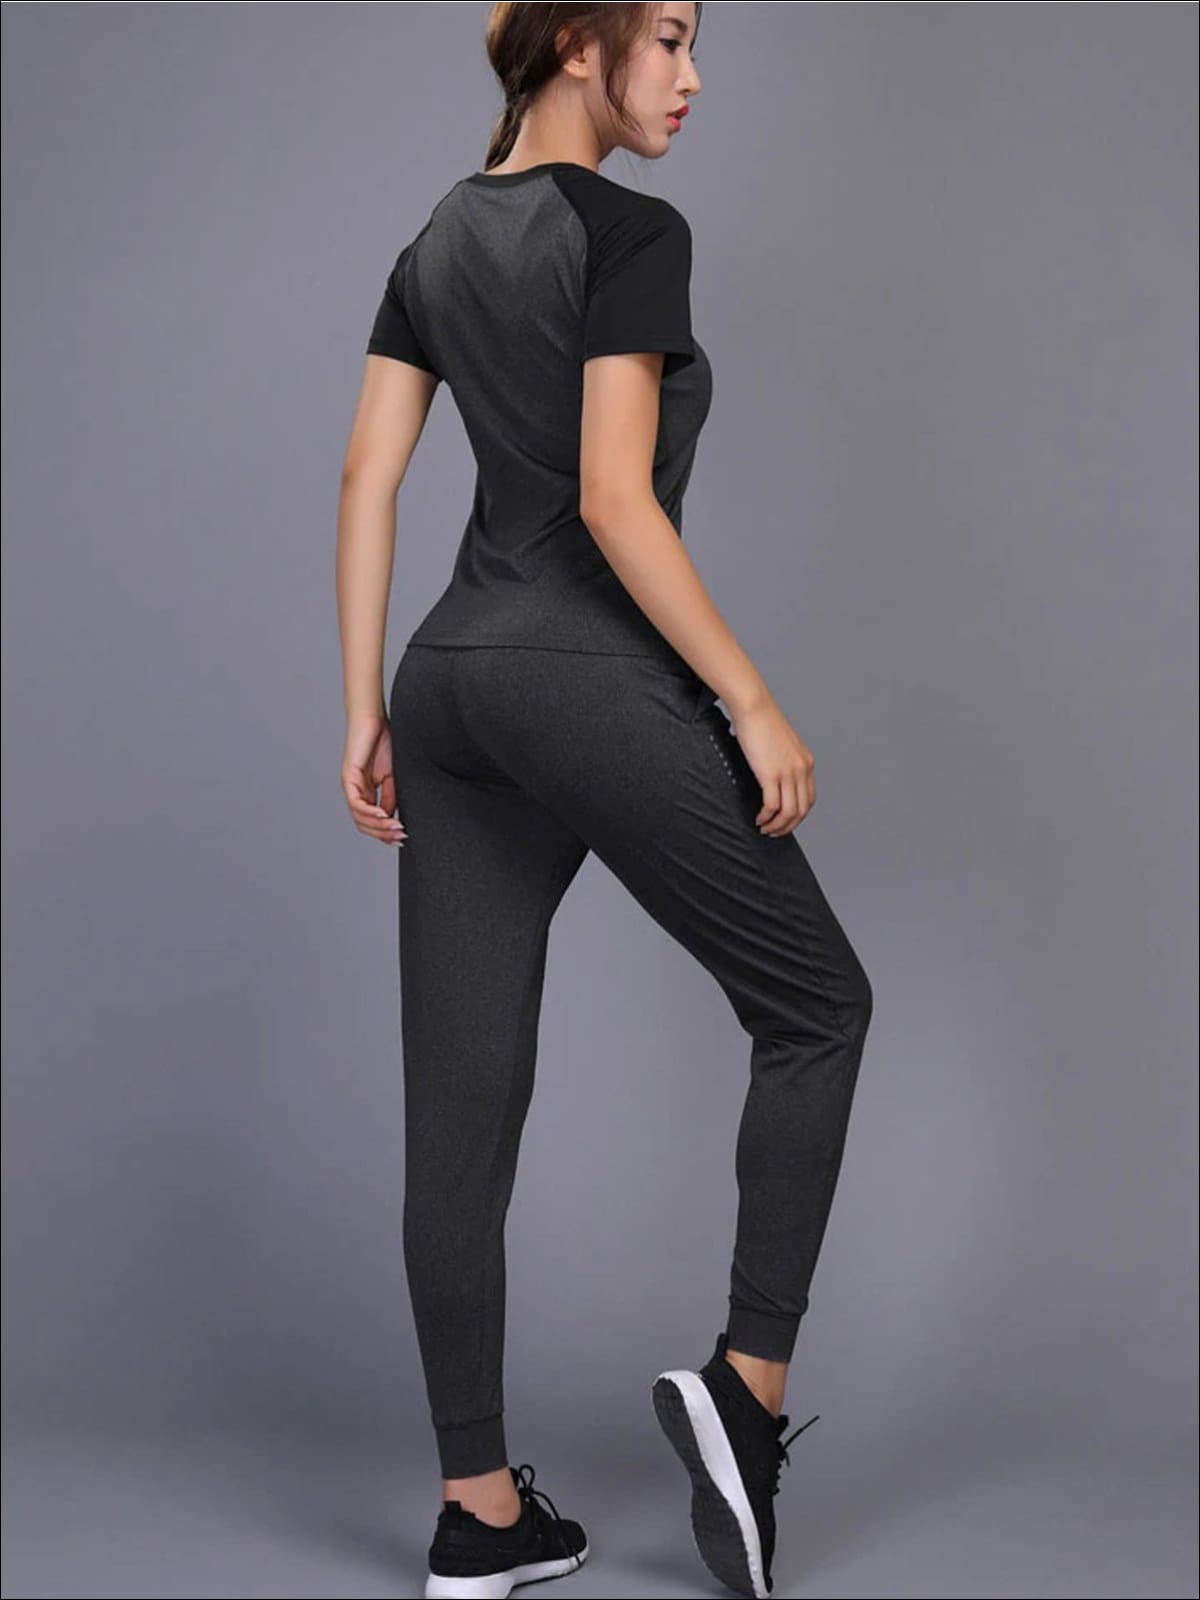 Womens Workout Sets (Top And Joggers) - Mia Belle Girls